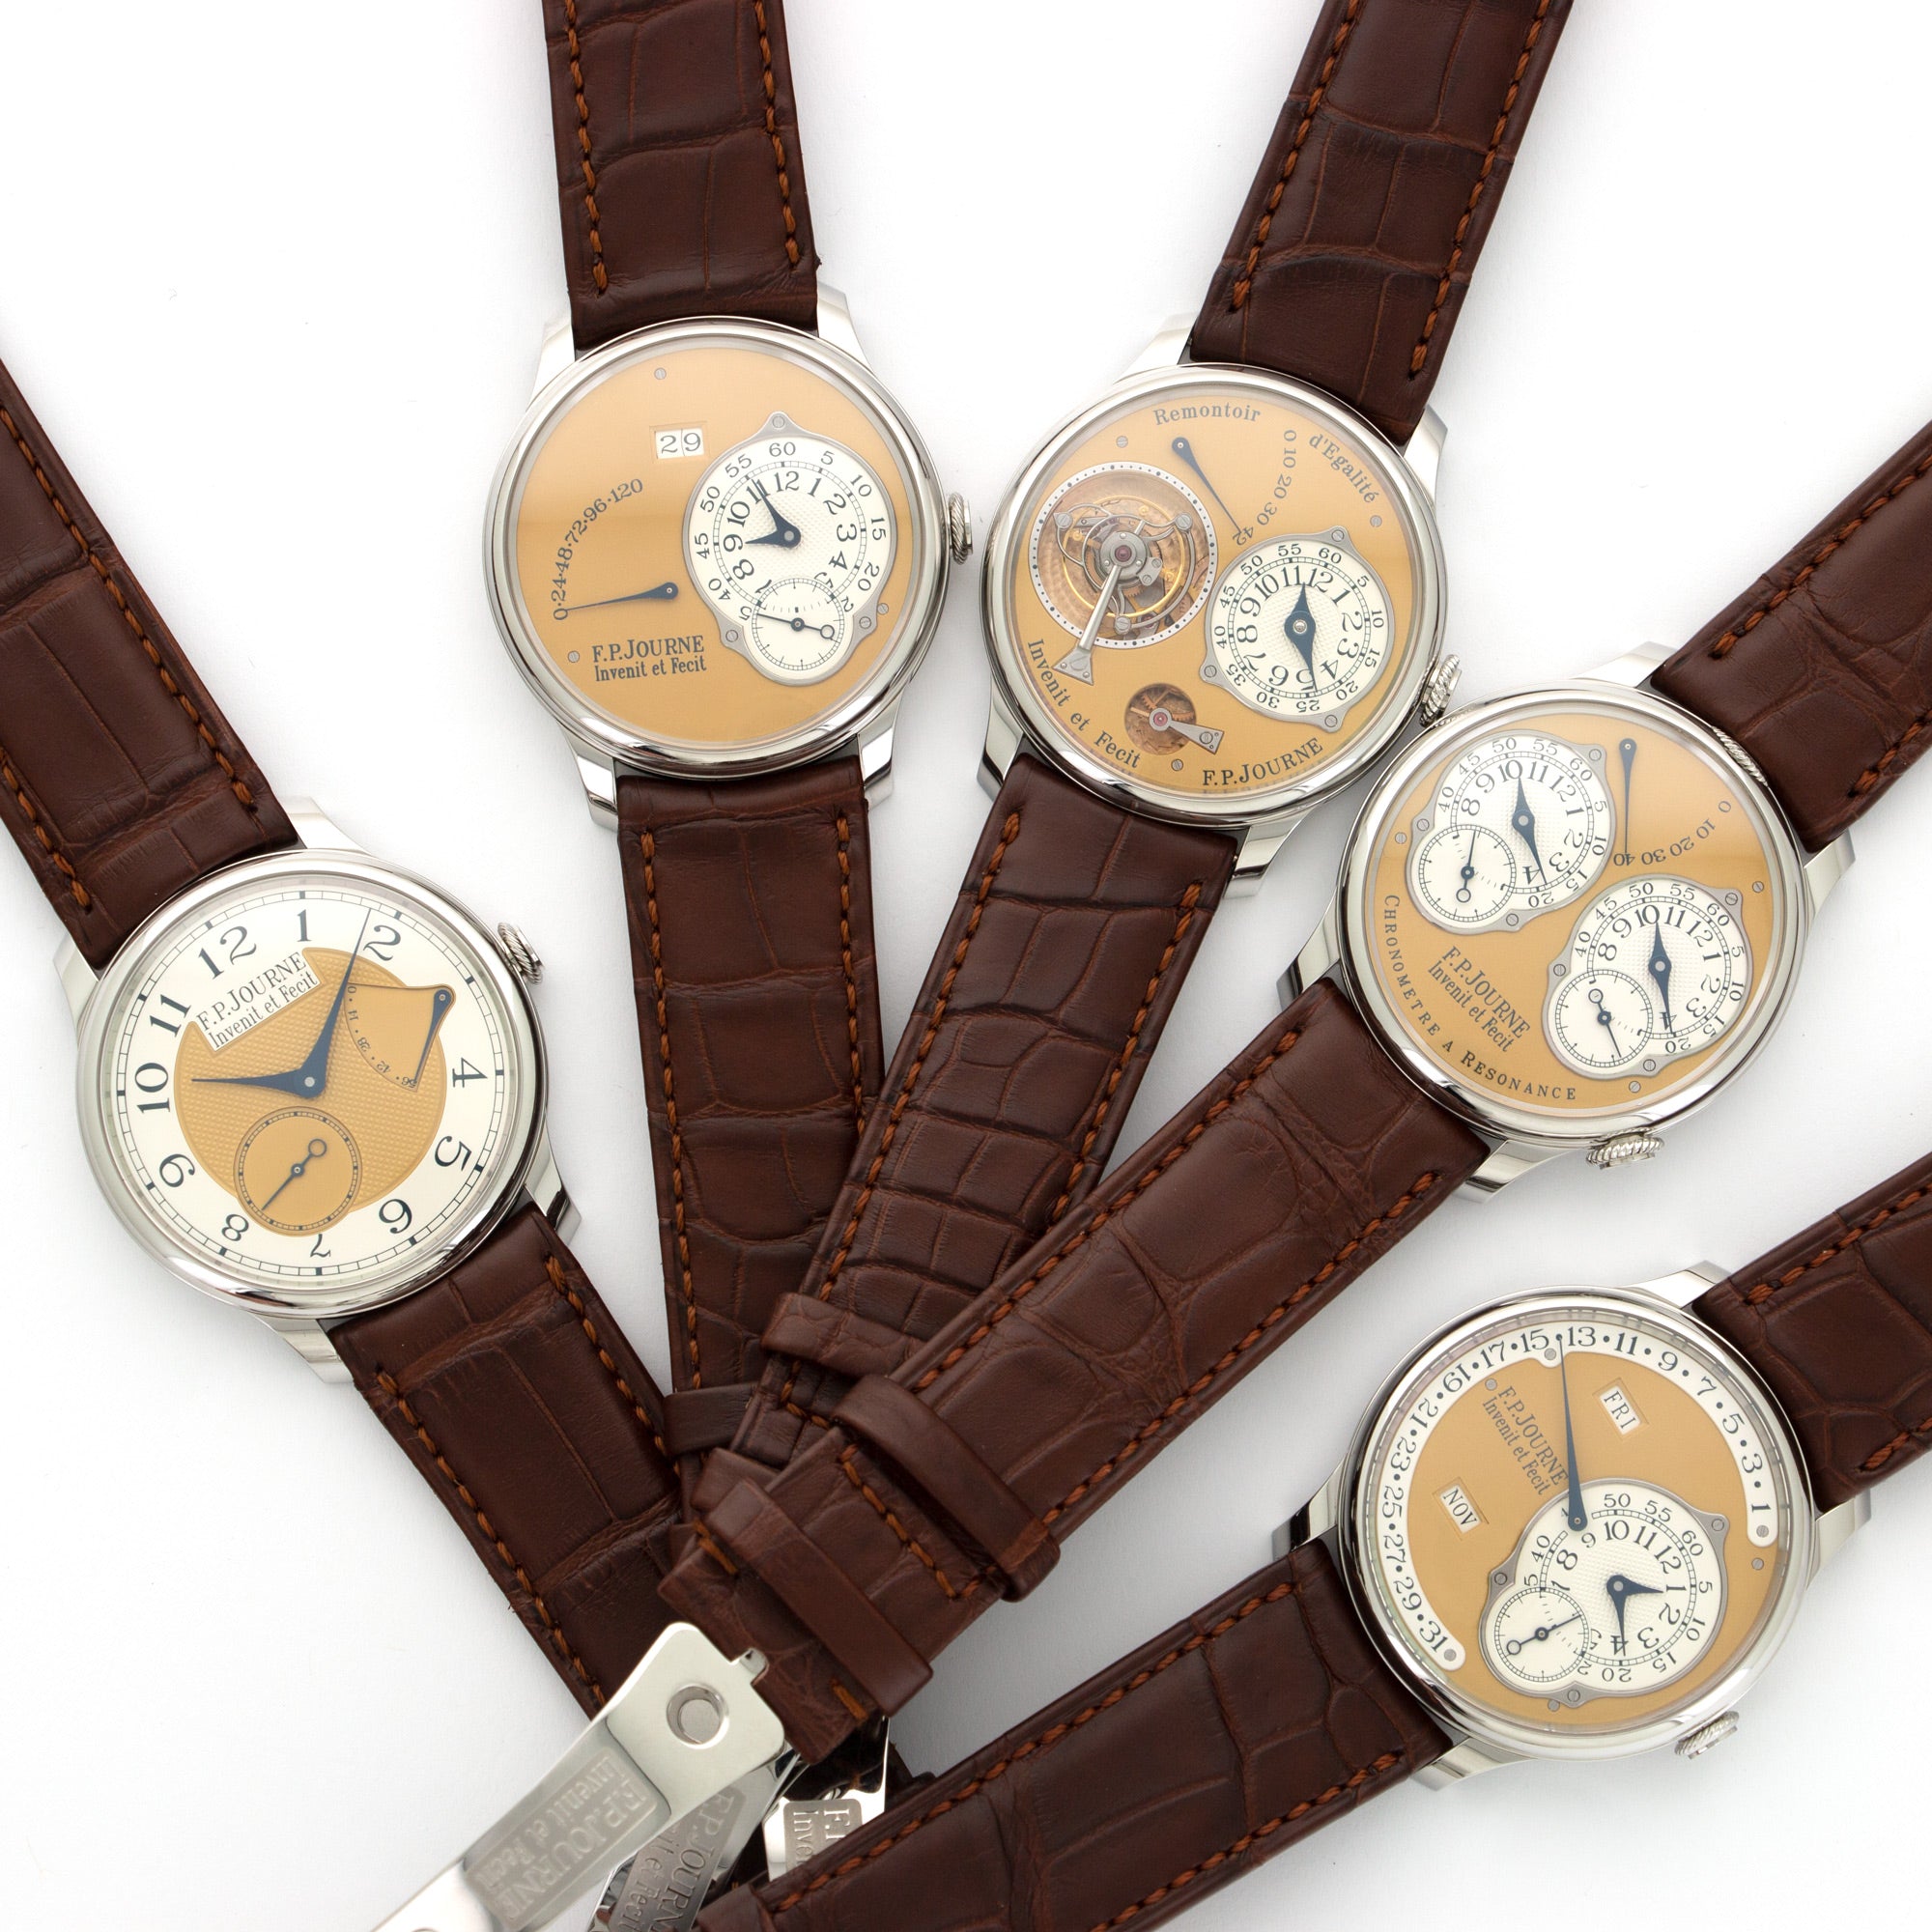 FP Journe - F.P. Journe Steel End of 38mm Five Watch Set from 2015 - The Keystone Watches